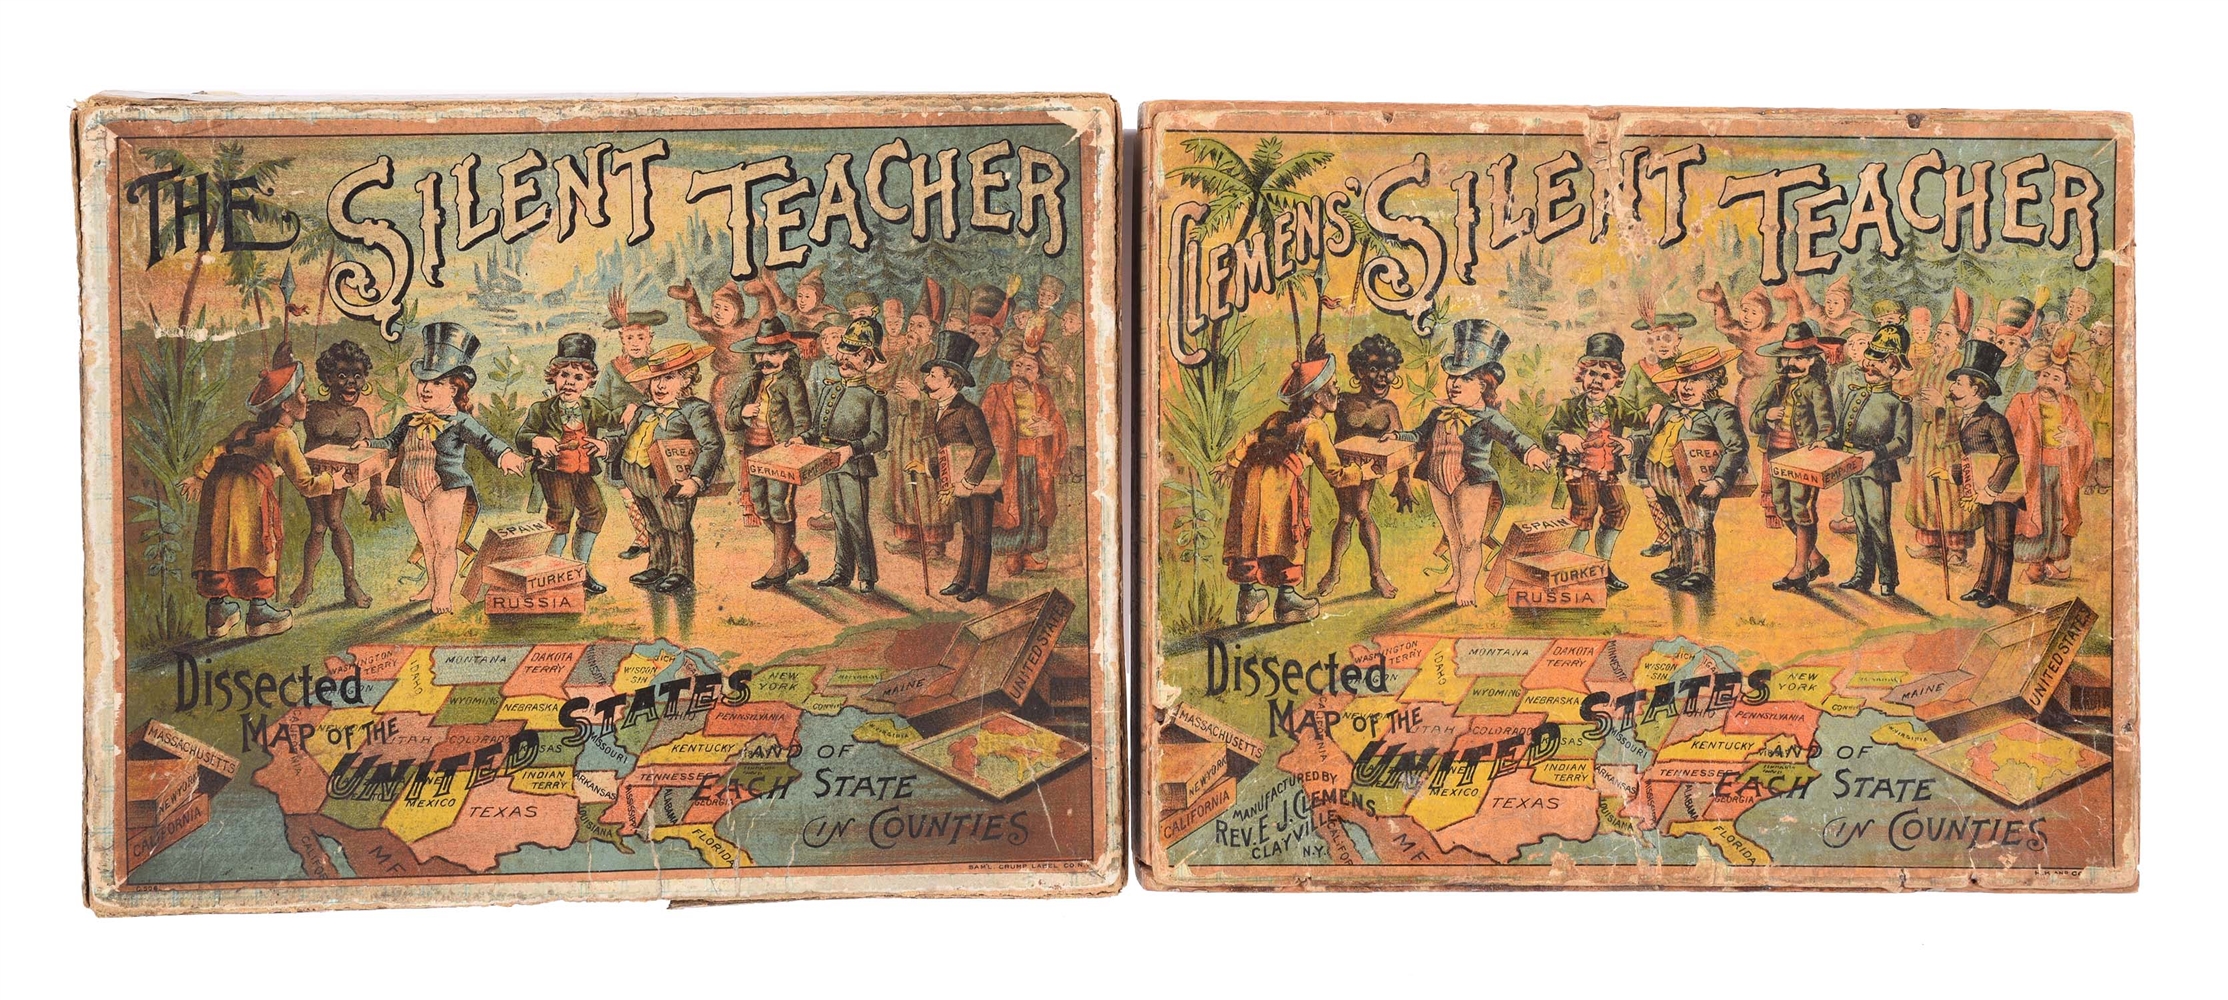 LOT OF 2: THE SILENT TEACHER PUZZLES IN BOXES. 